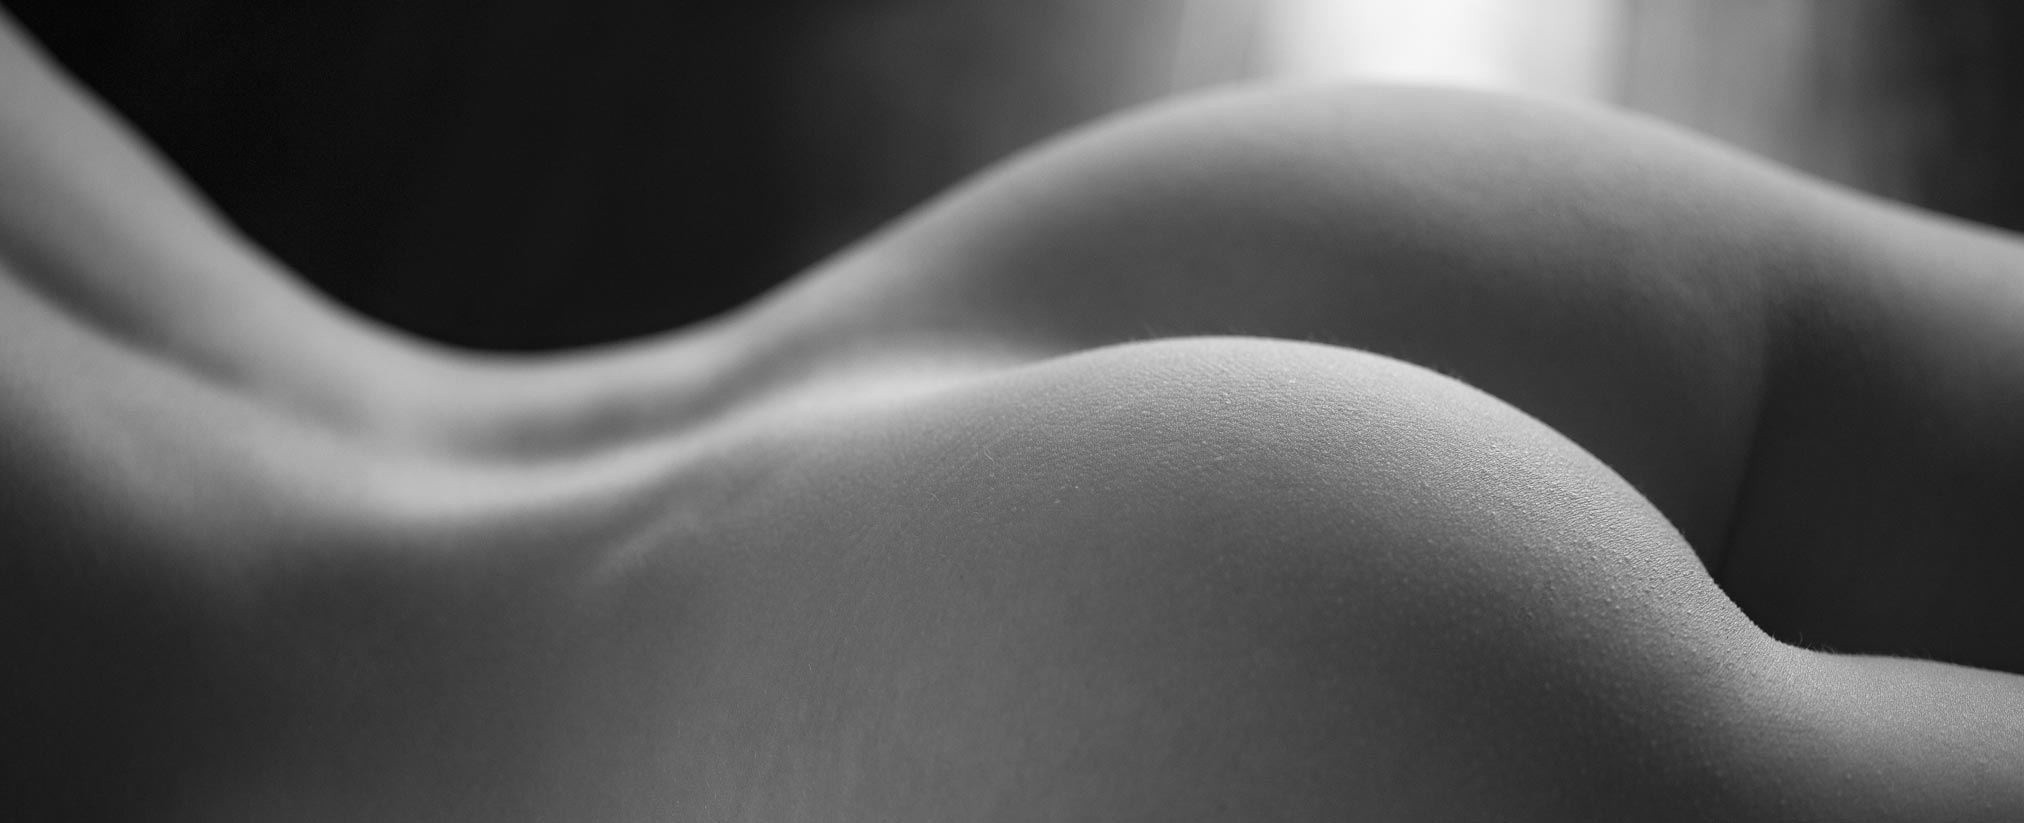 a figure study of a woman's back by Damien Lovegrove